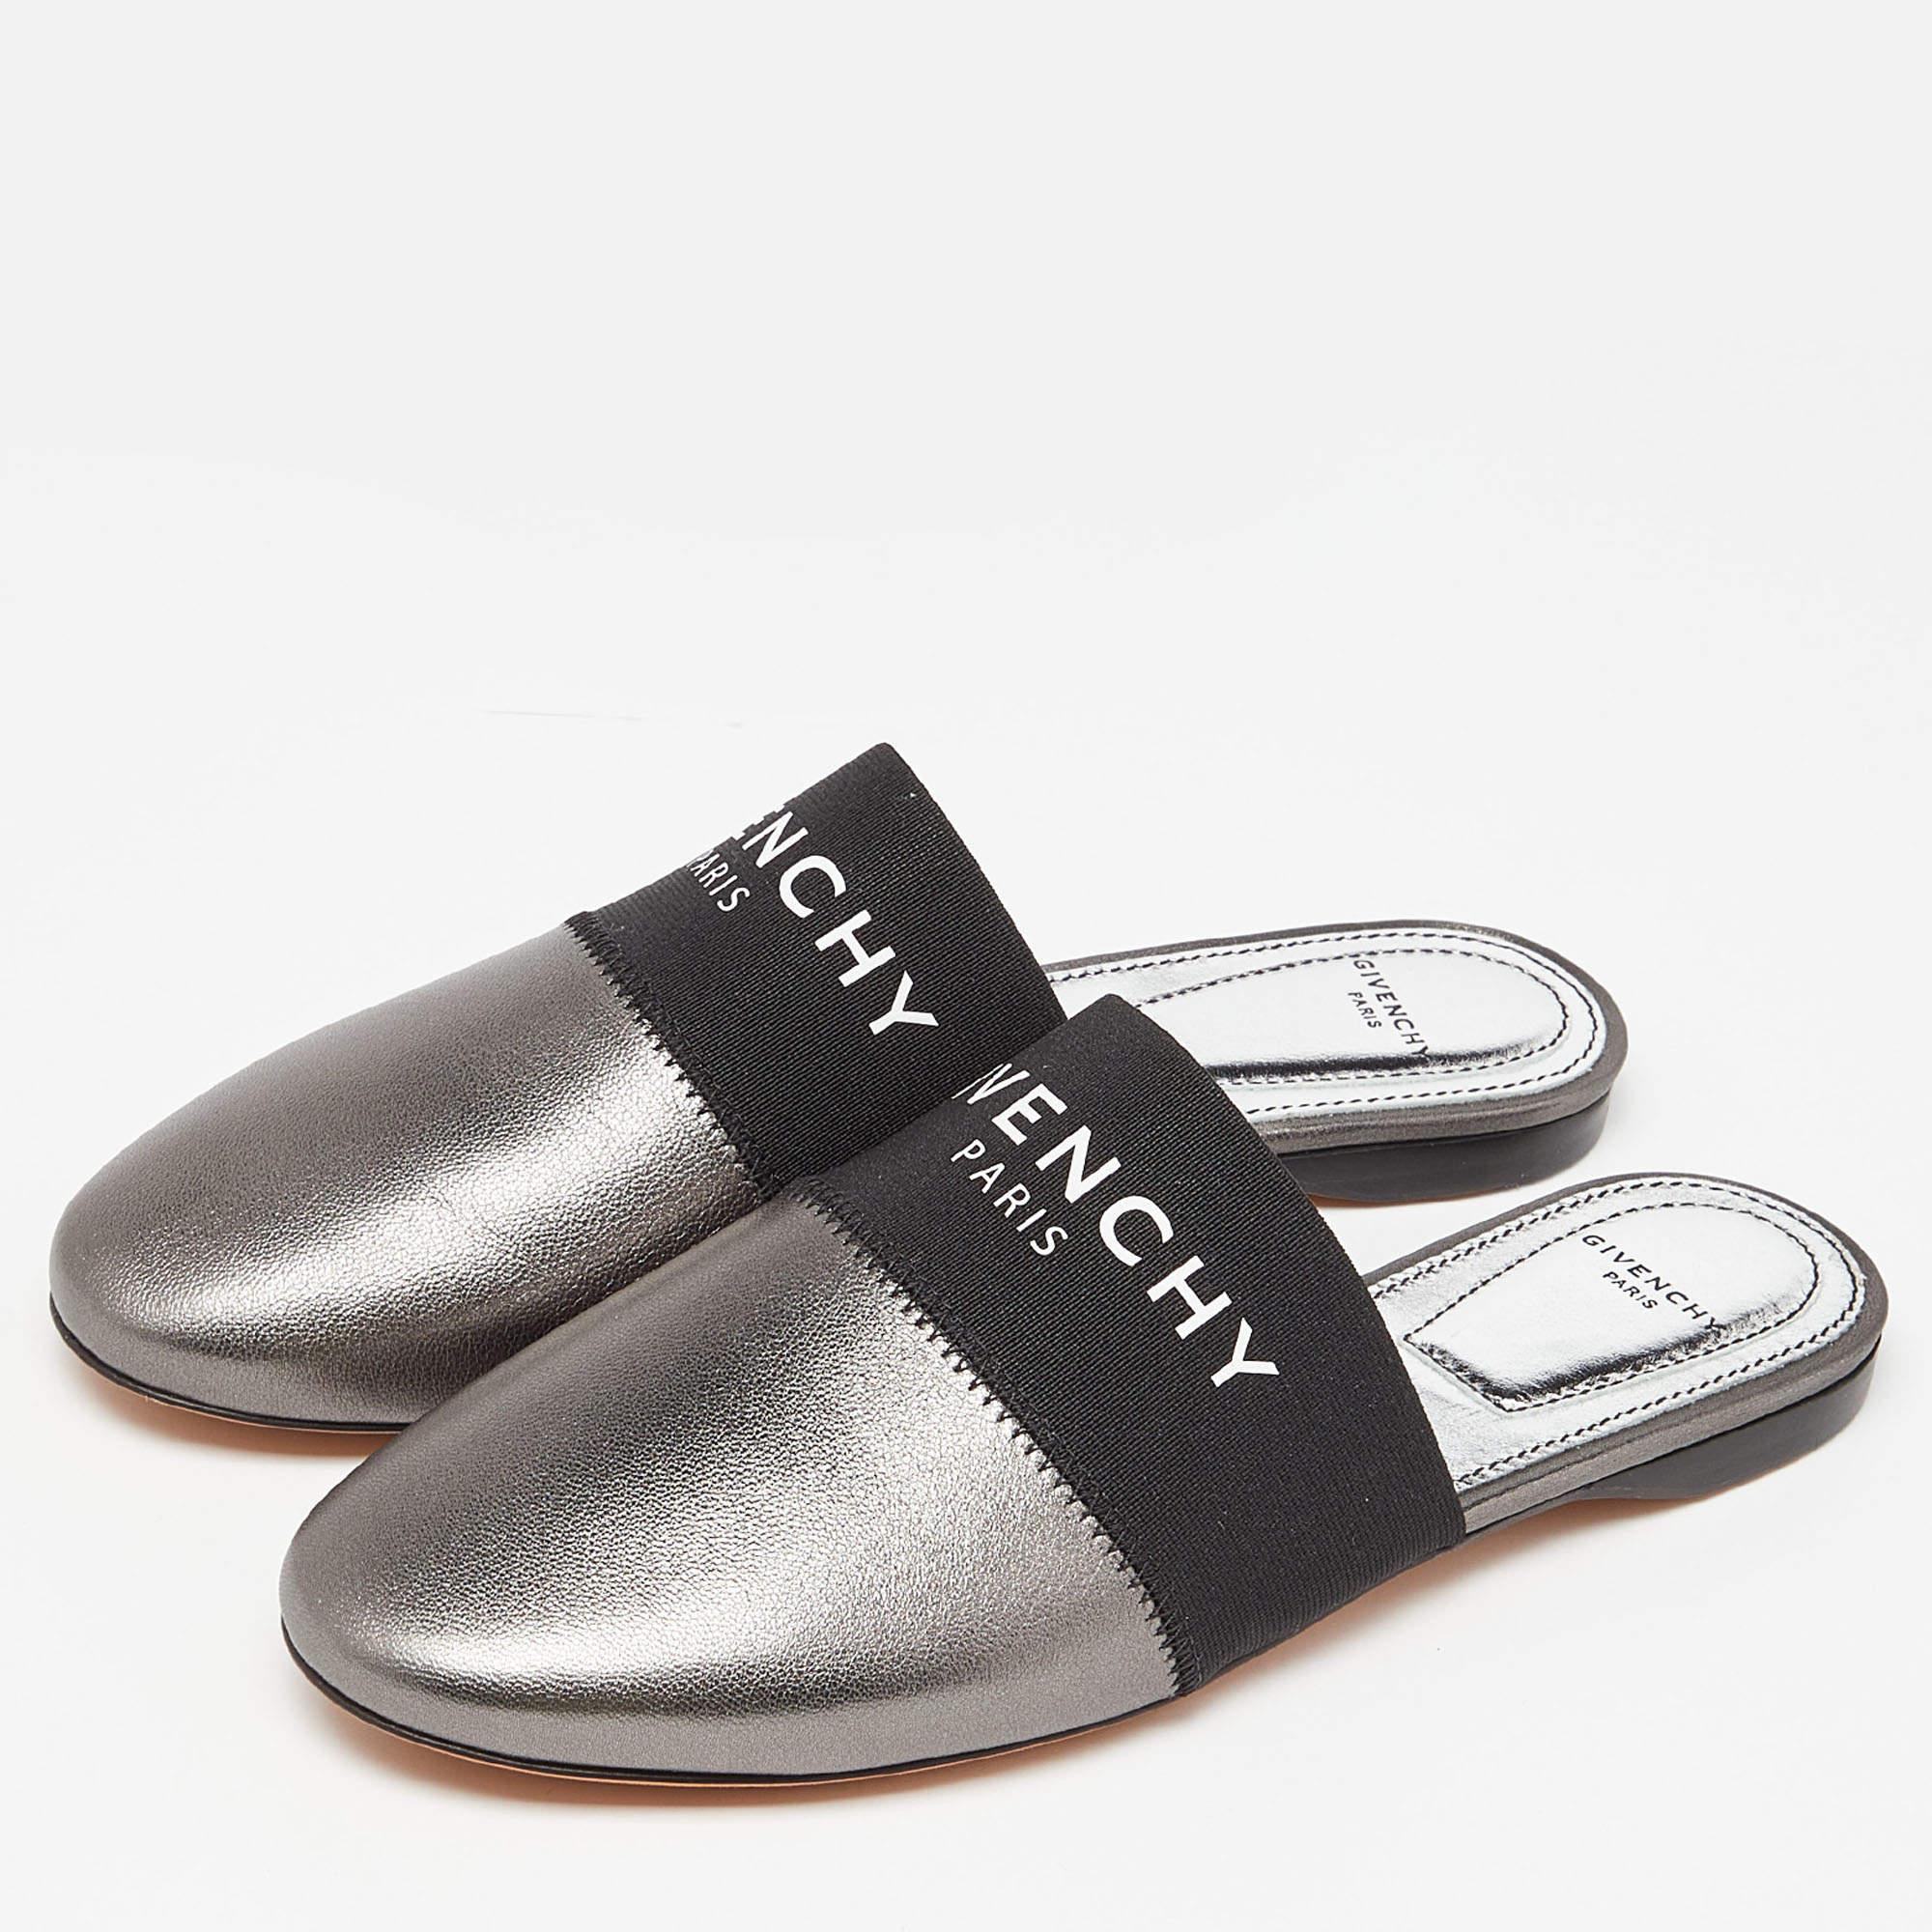 Givenchy Metallic Grey Leather Bedford Flat Mules Size 36 In New Condition For Sale In Dubai, Al Qouz 2